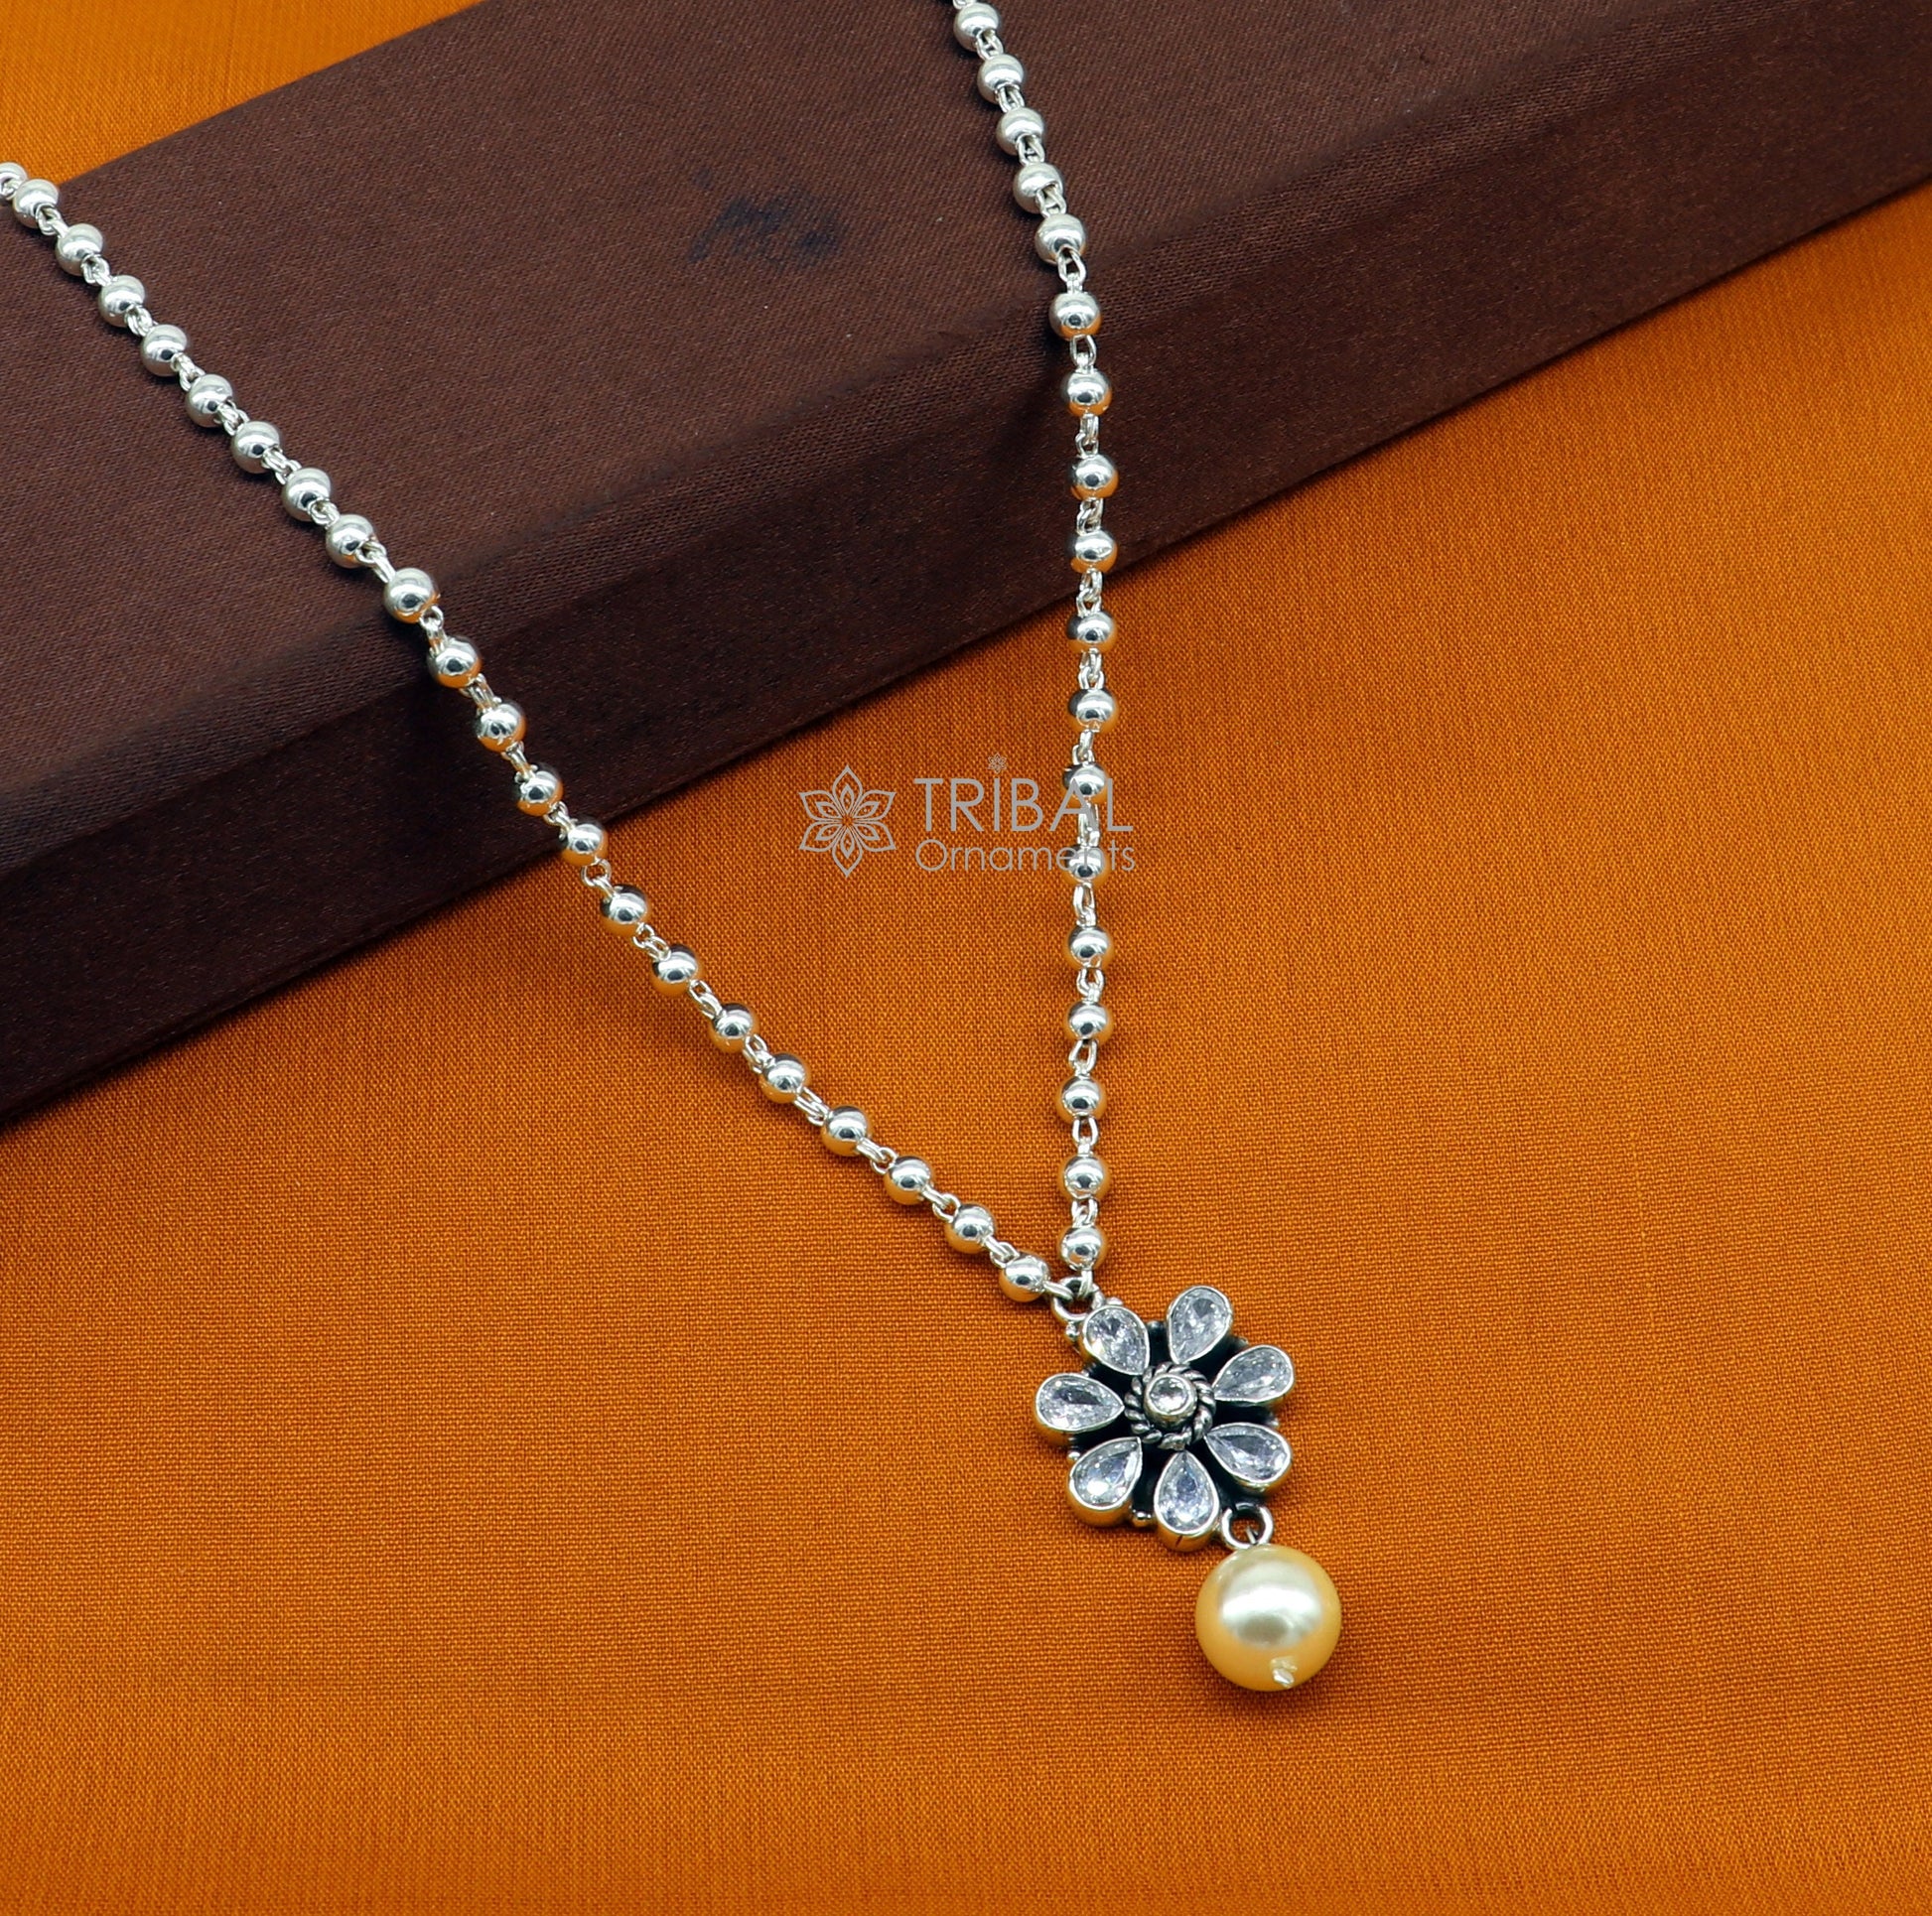 Traditional cultural trendy 925 sterling silver plain beads ball chain necklace with flower design pendant and hanging pearl jewelry set578 - TRIBAL ORNAMENTS